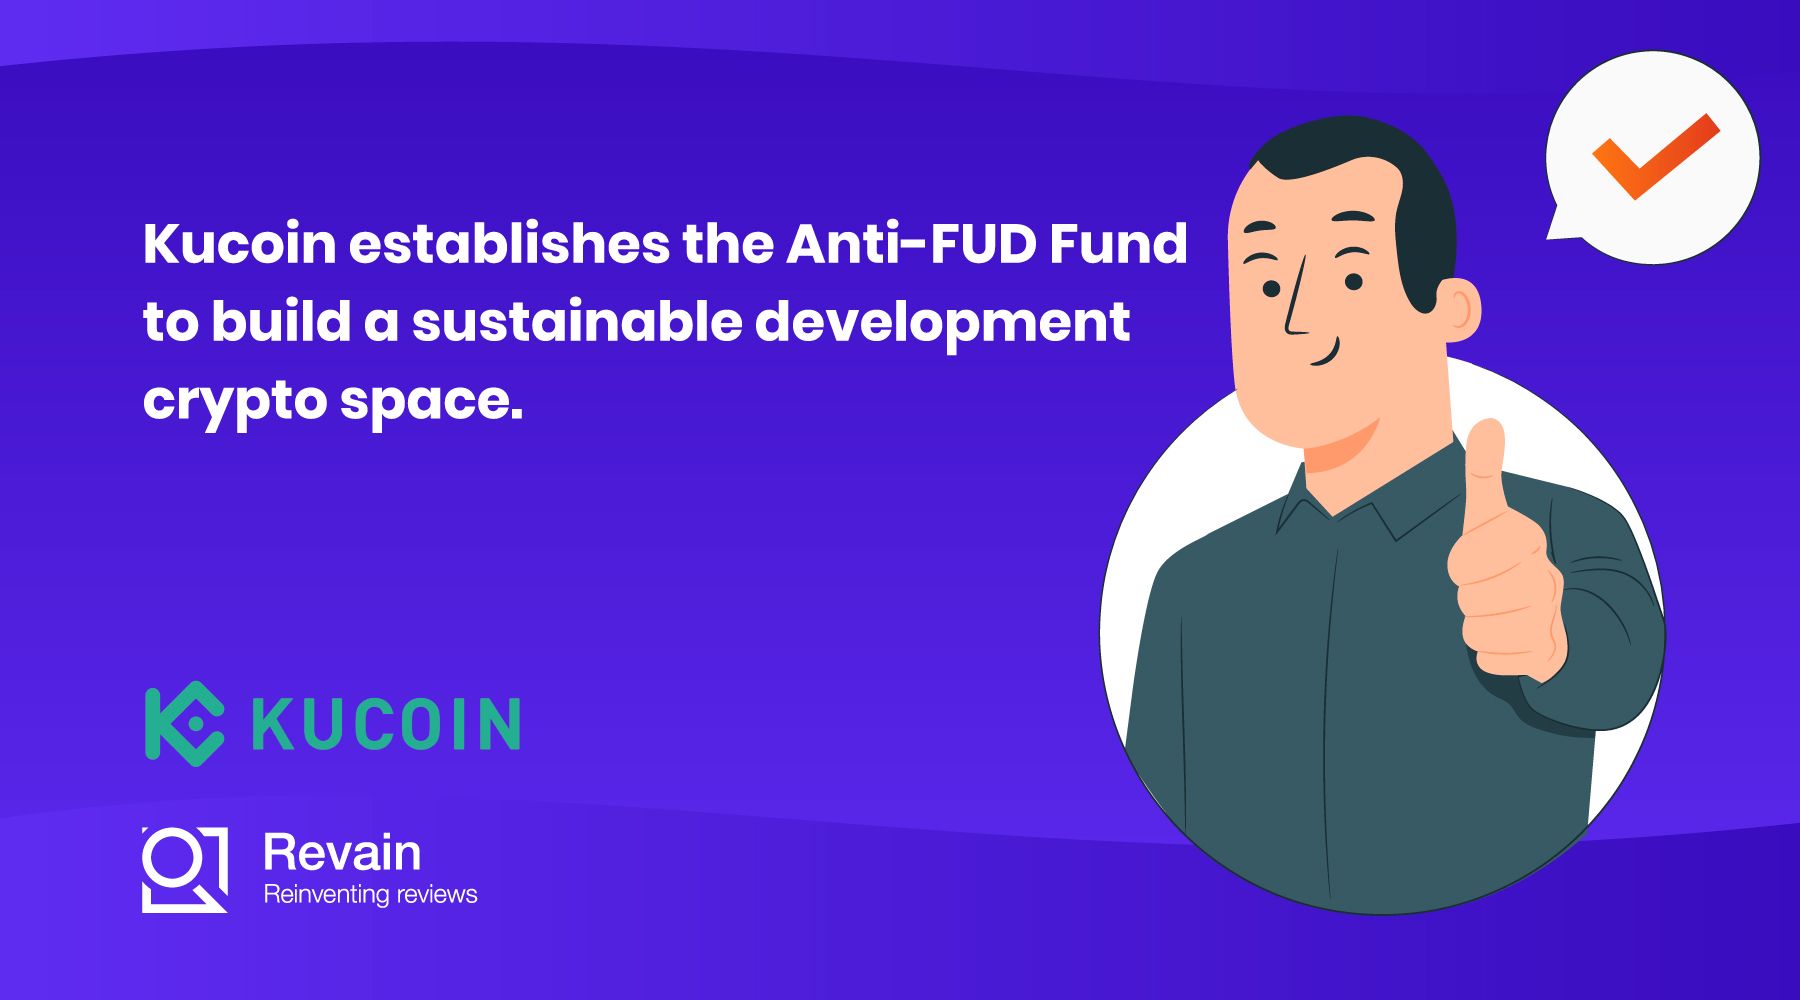 Article Kucoin establishes the Anti-FUD Fund to build a sustainable development crypto space.